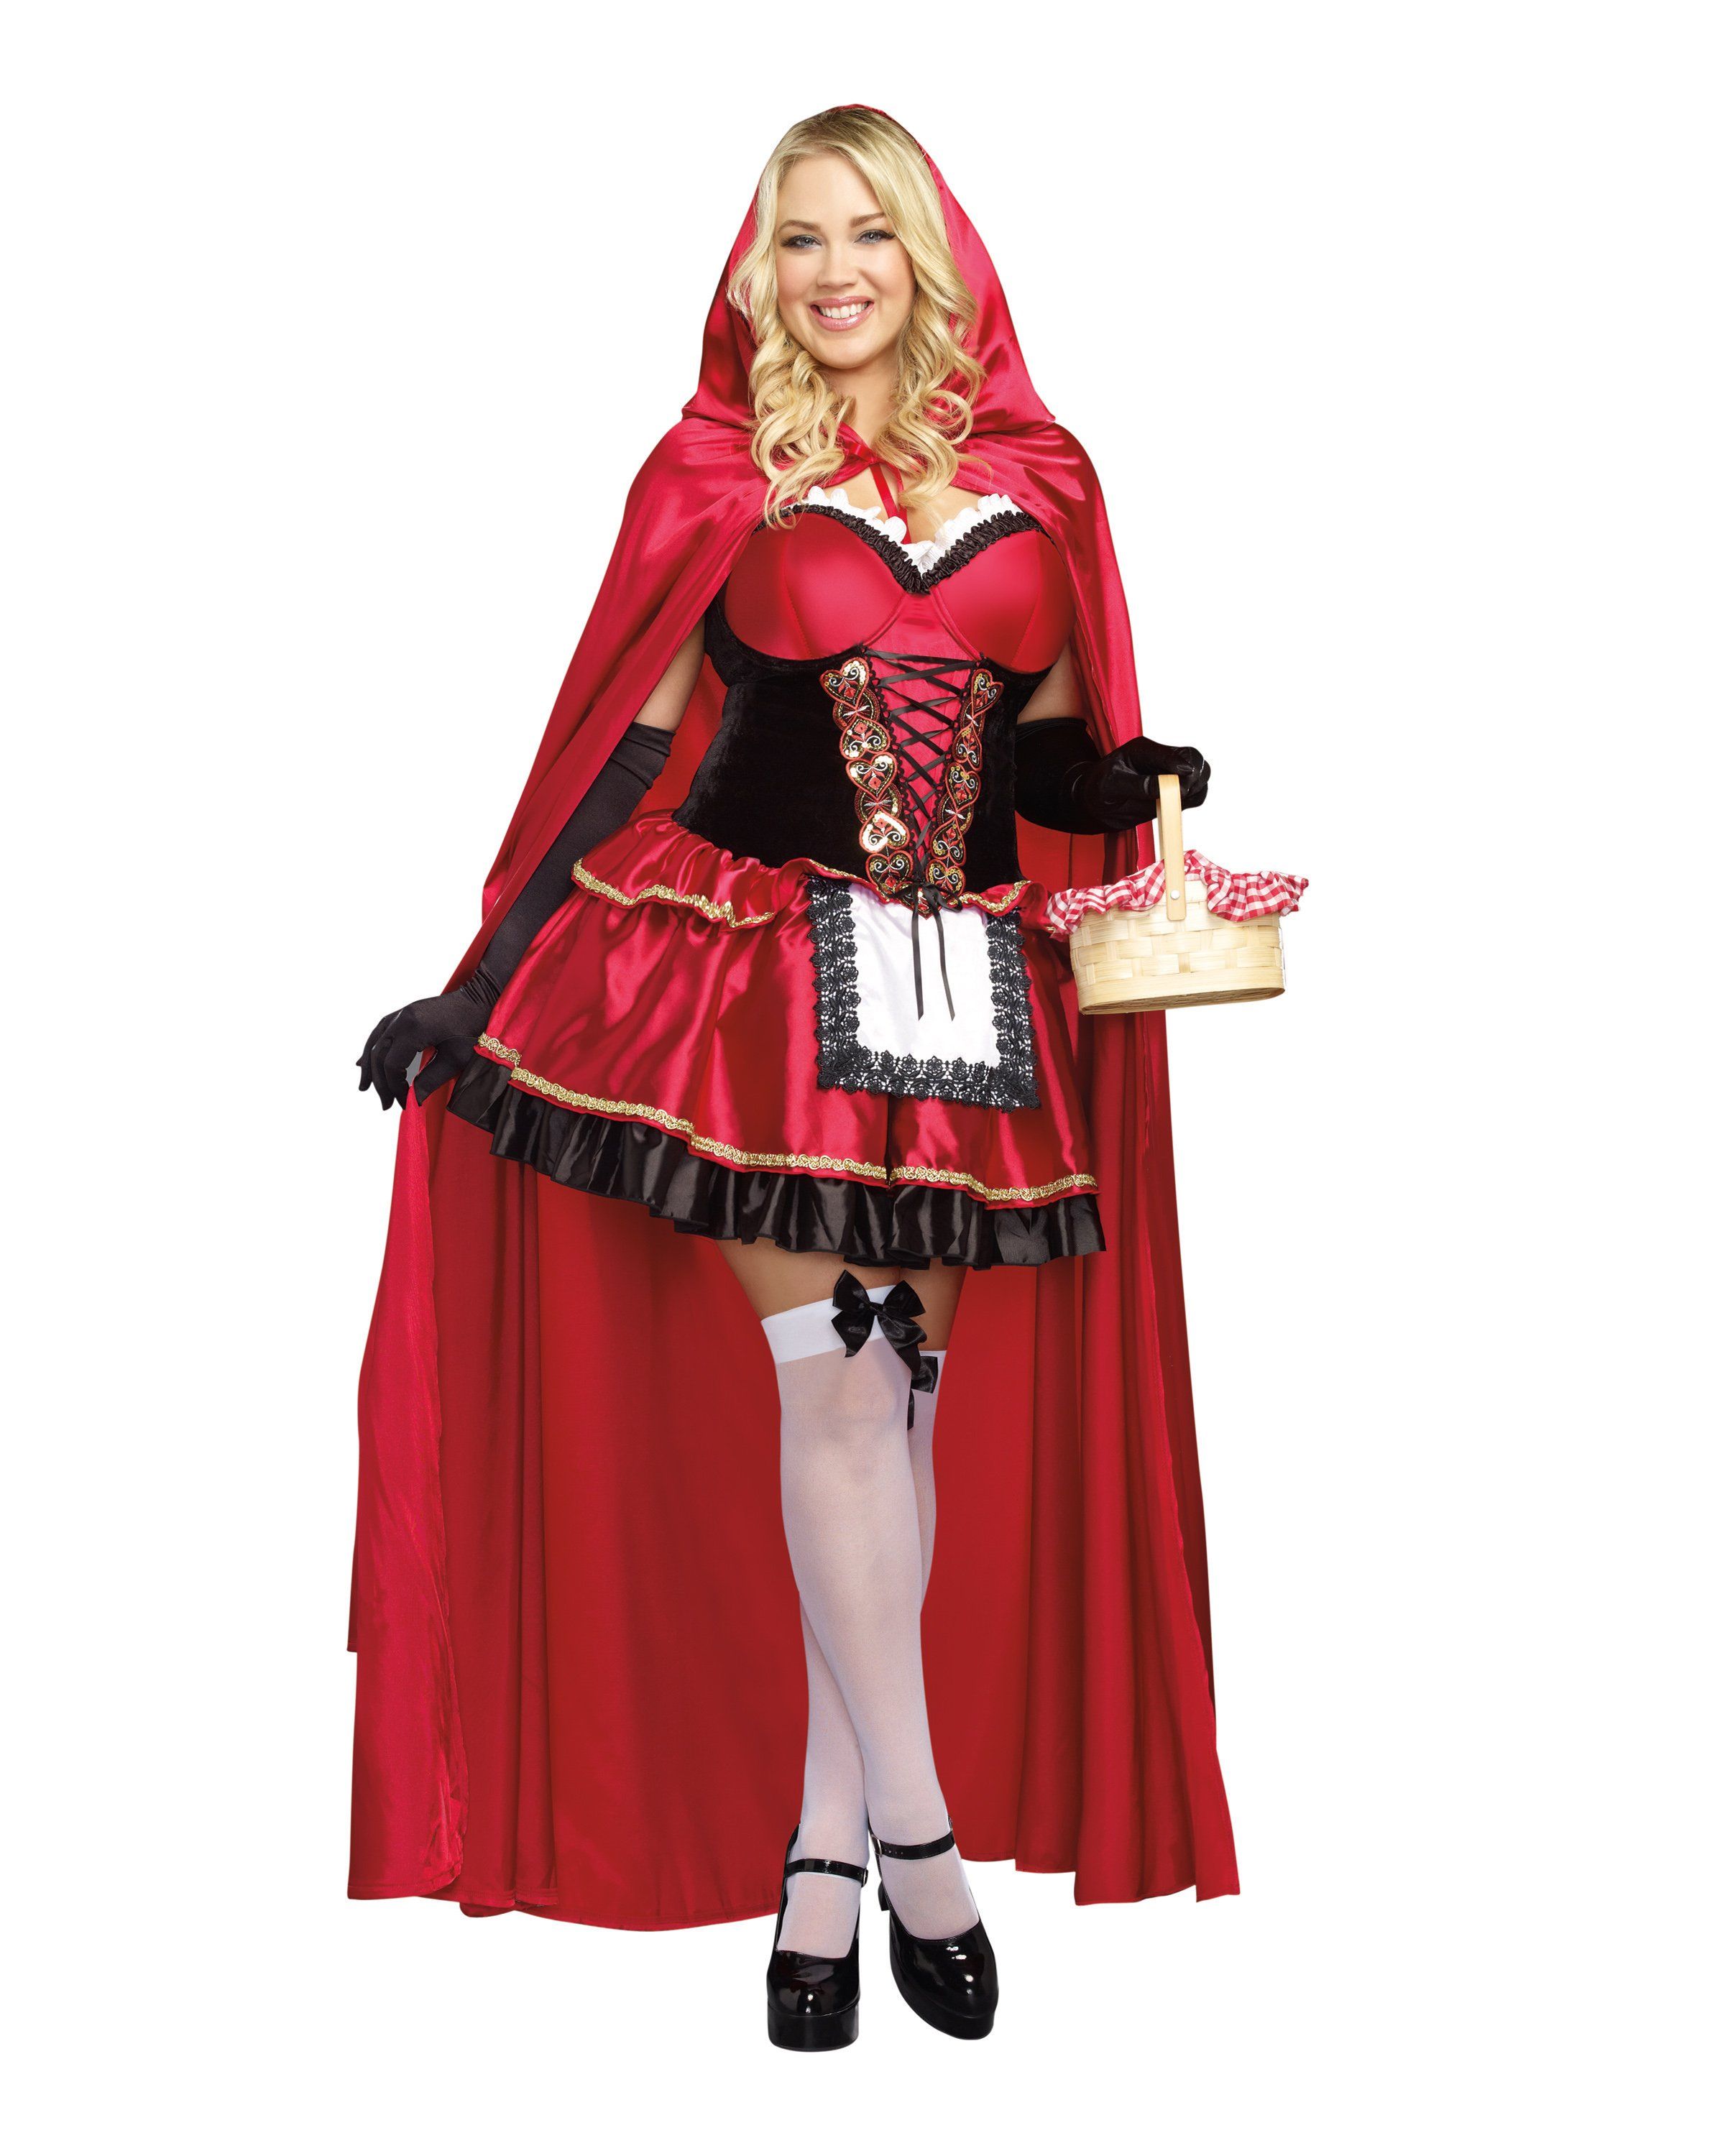 Plus Size Little Red Women's Costume Dreamgirl Costume 